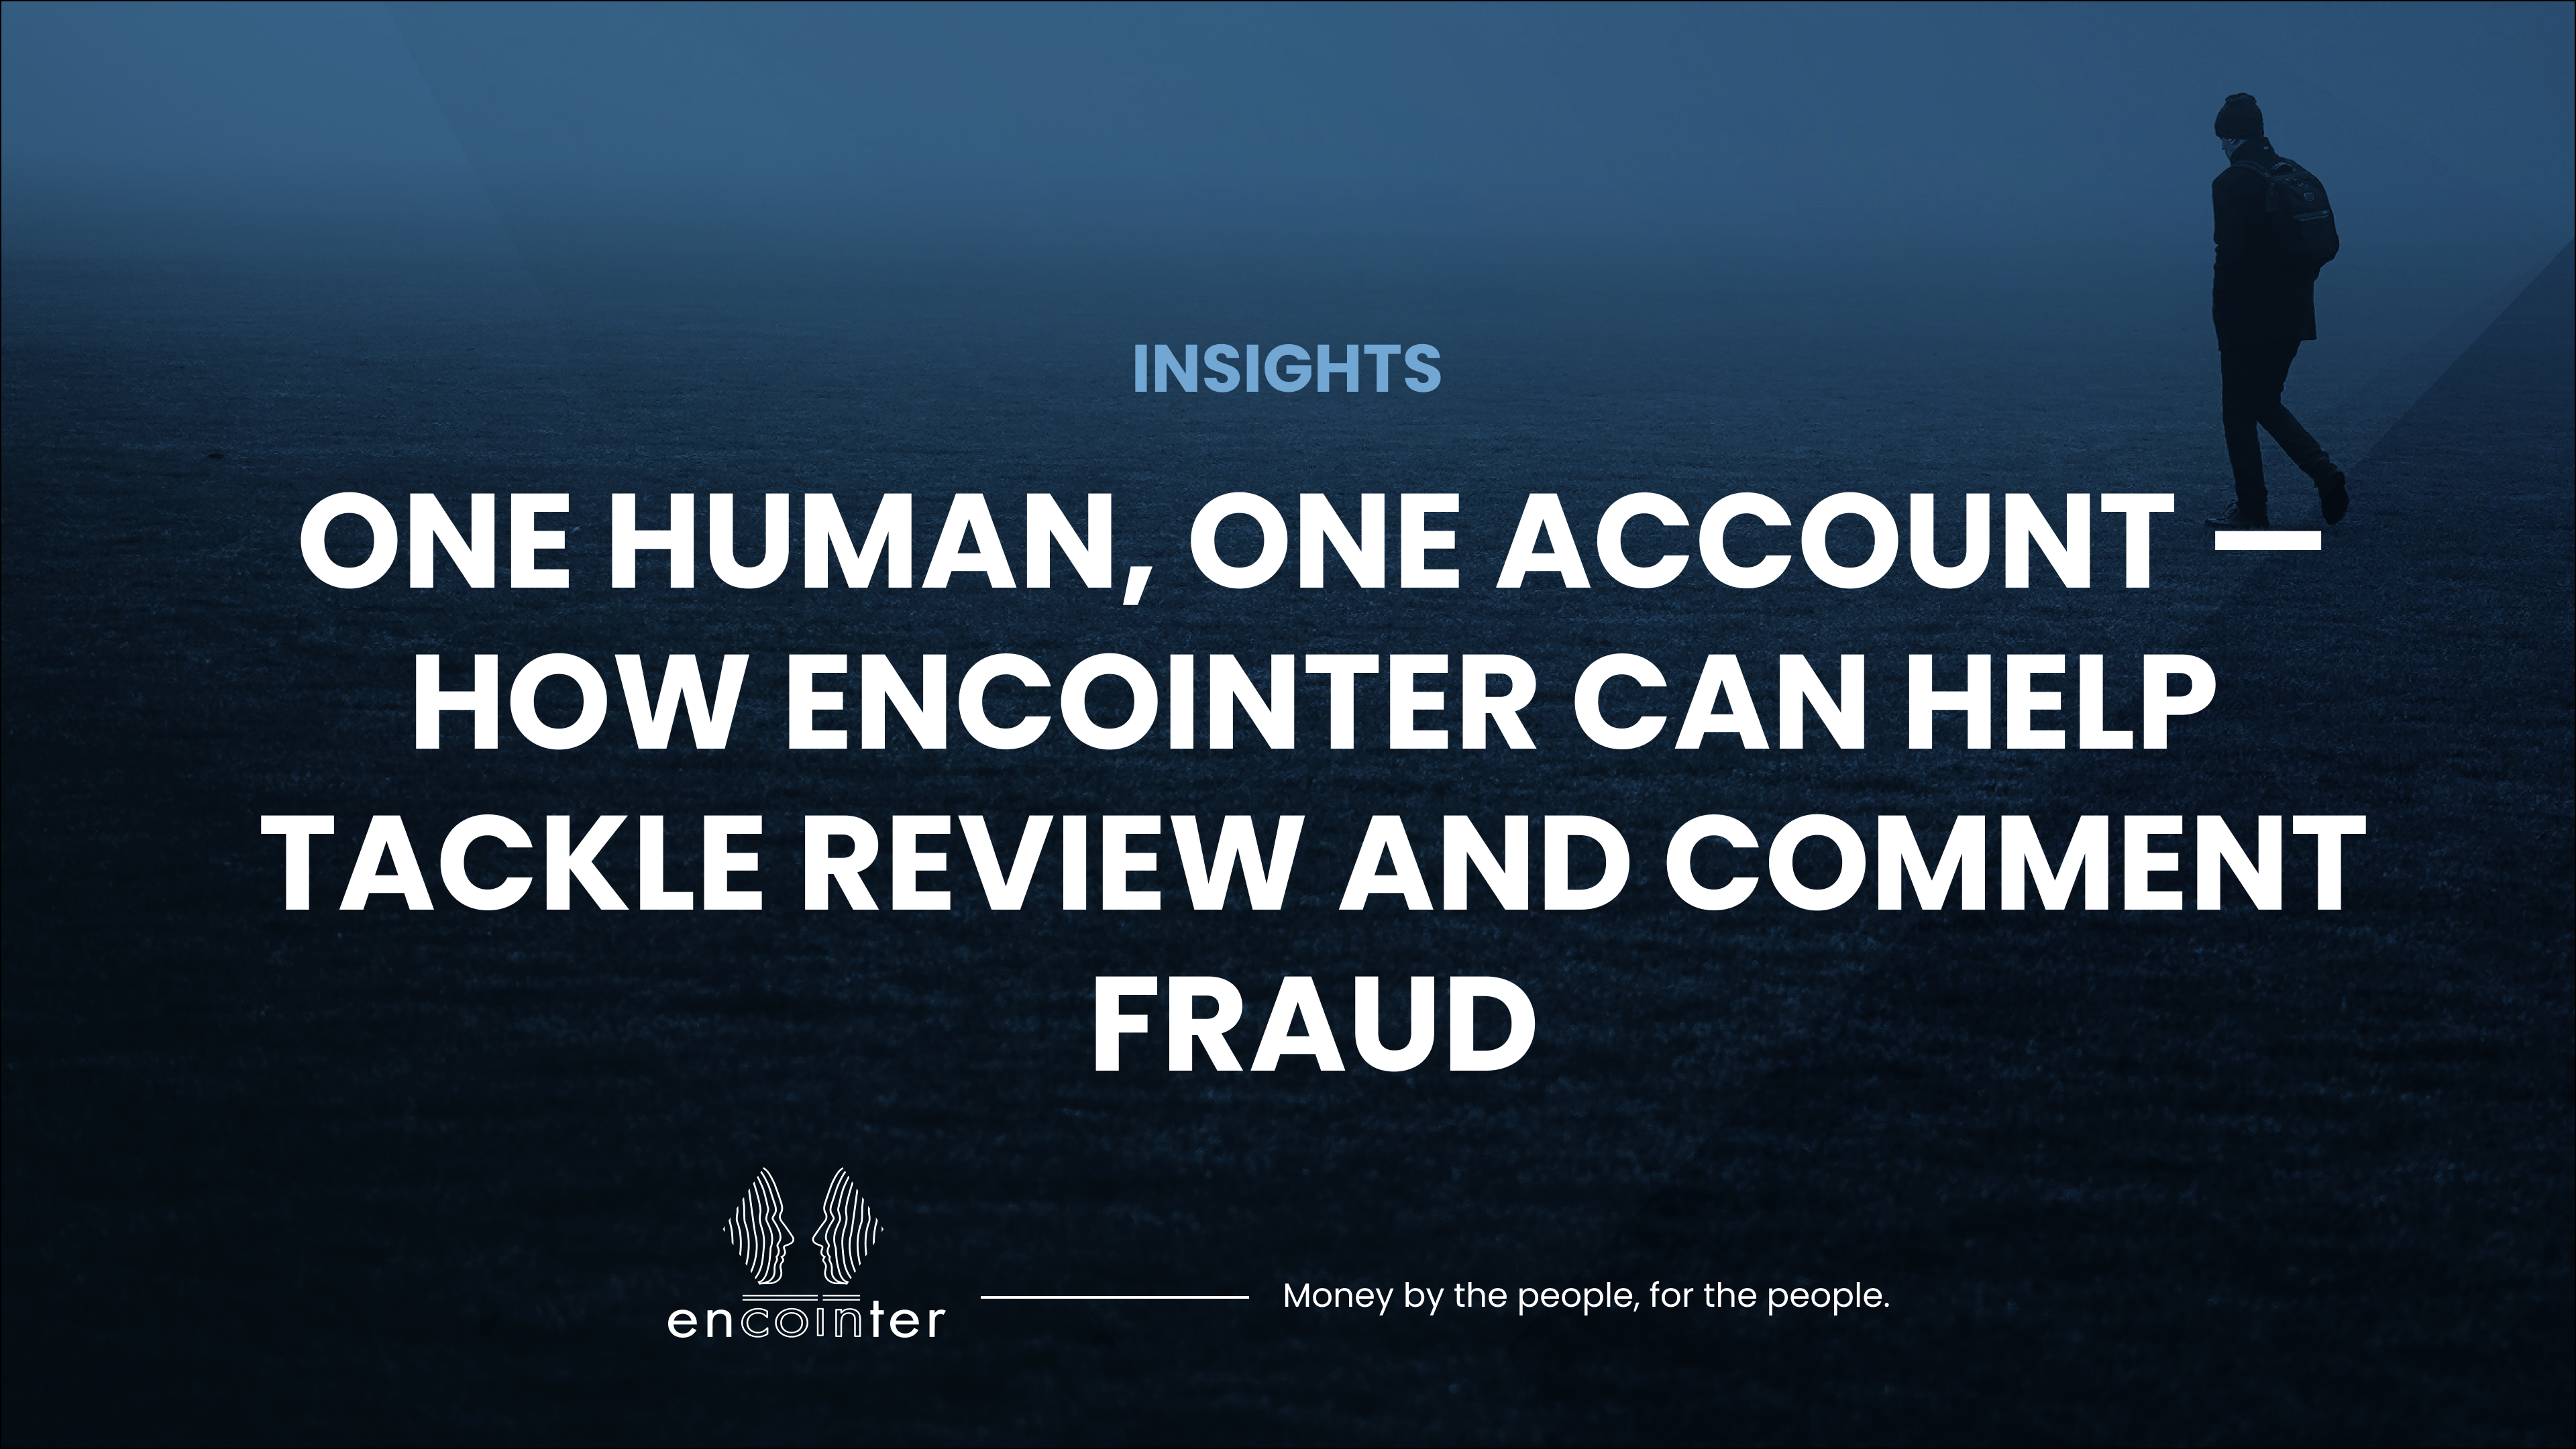 One human, one account — How Encointer can help tackle review and comment fraud